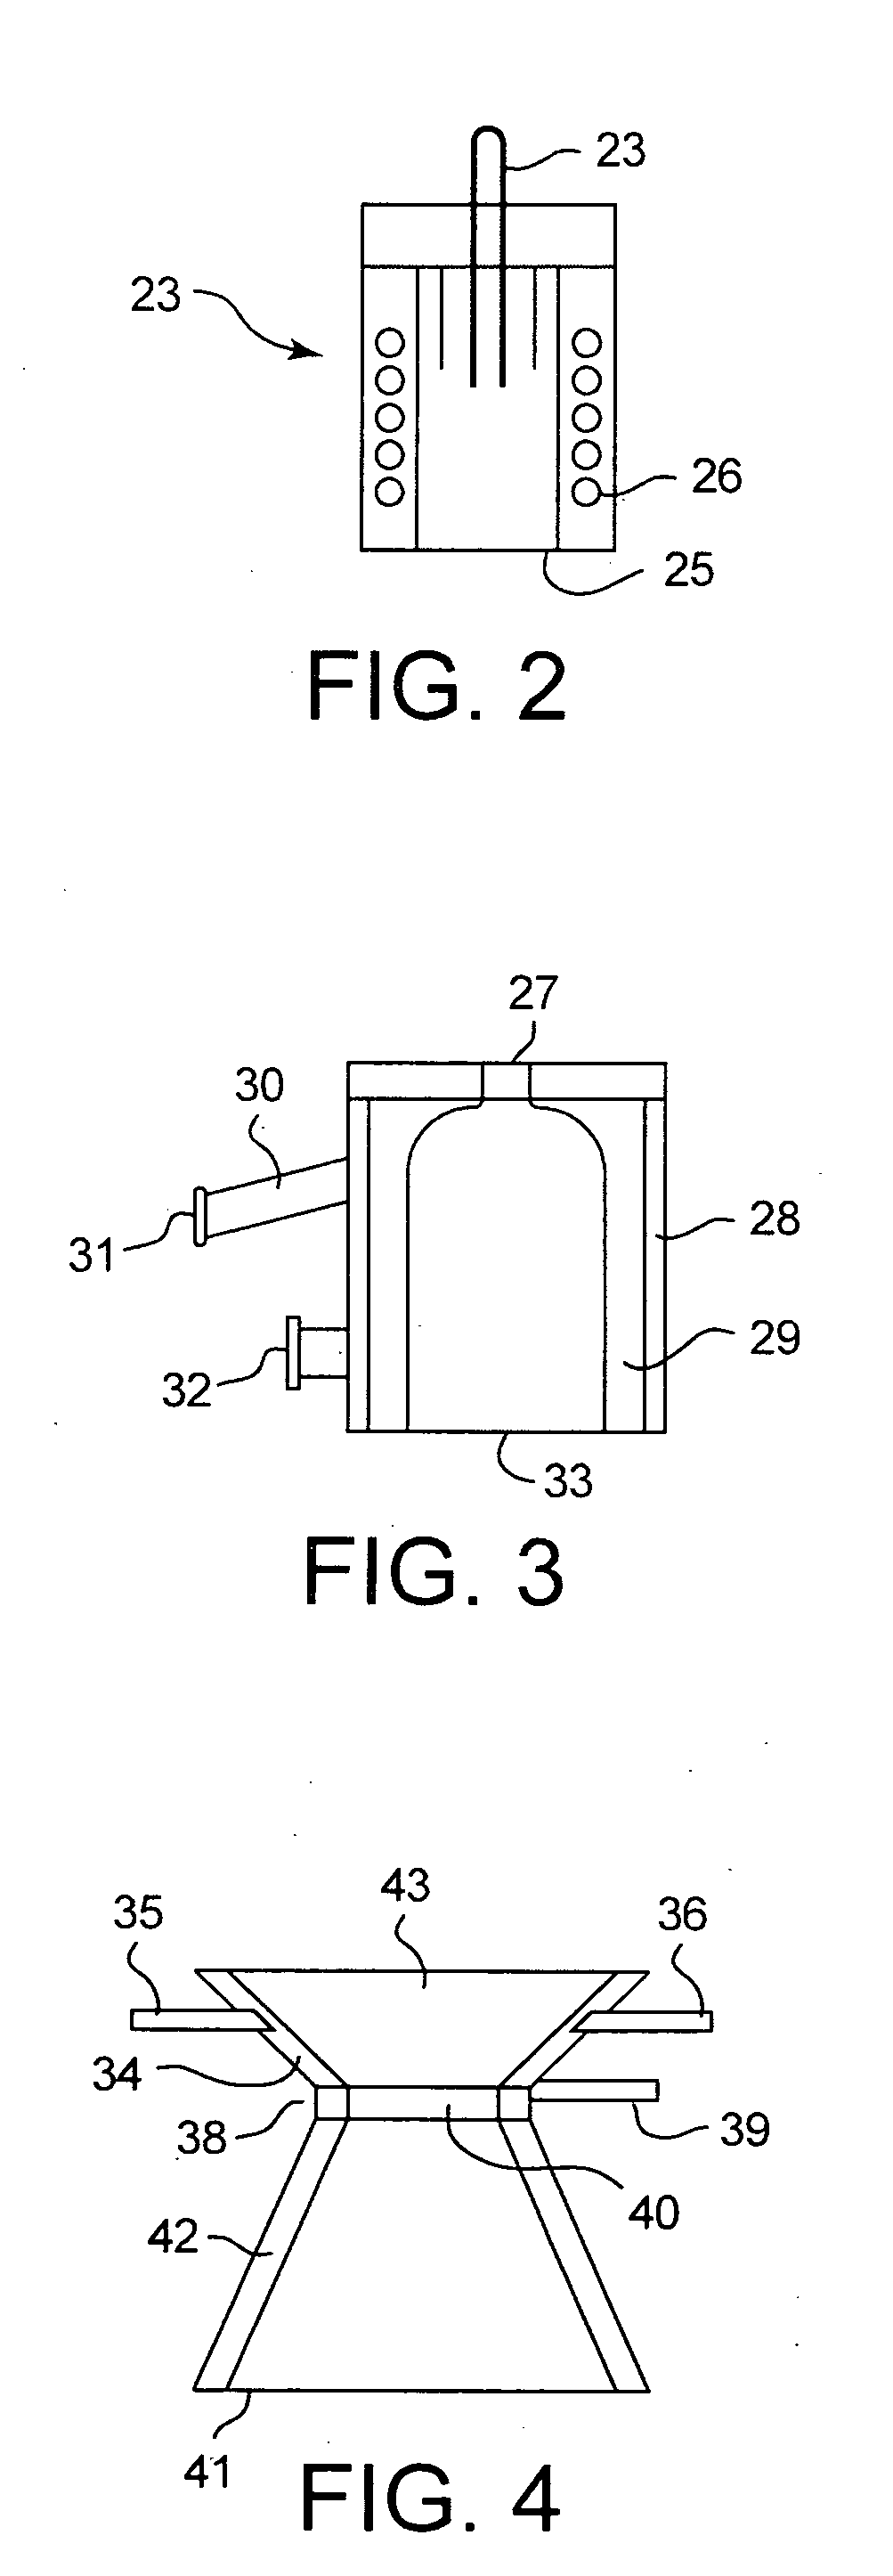 Device and Method for Destroying Liquid, Powder or Gaseous Waste Using an Inductively Coupled Plasma